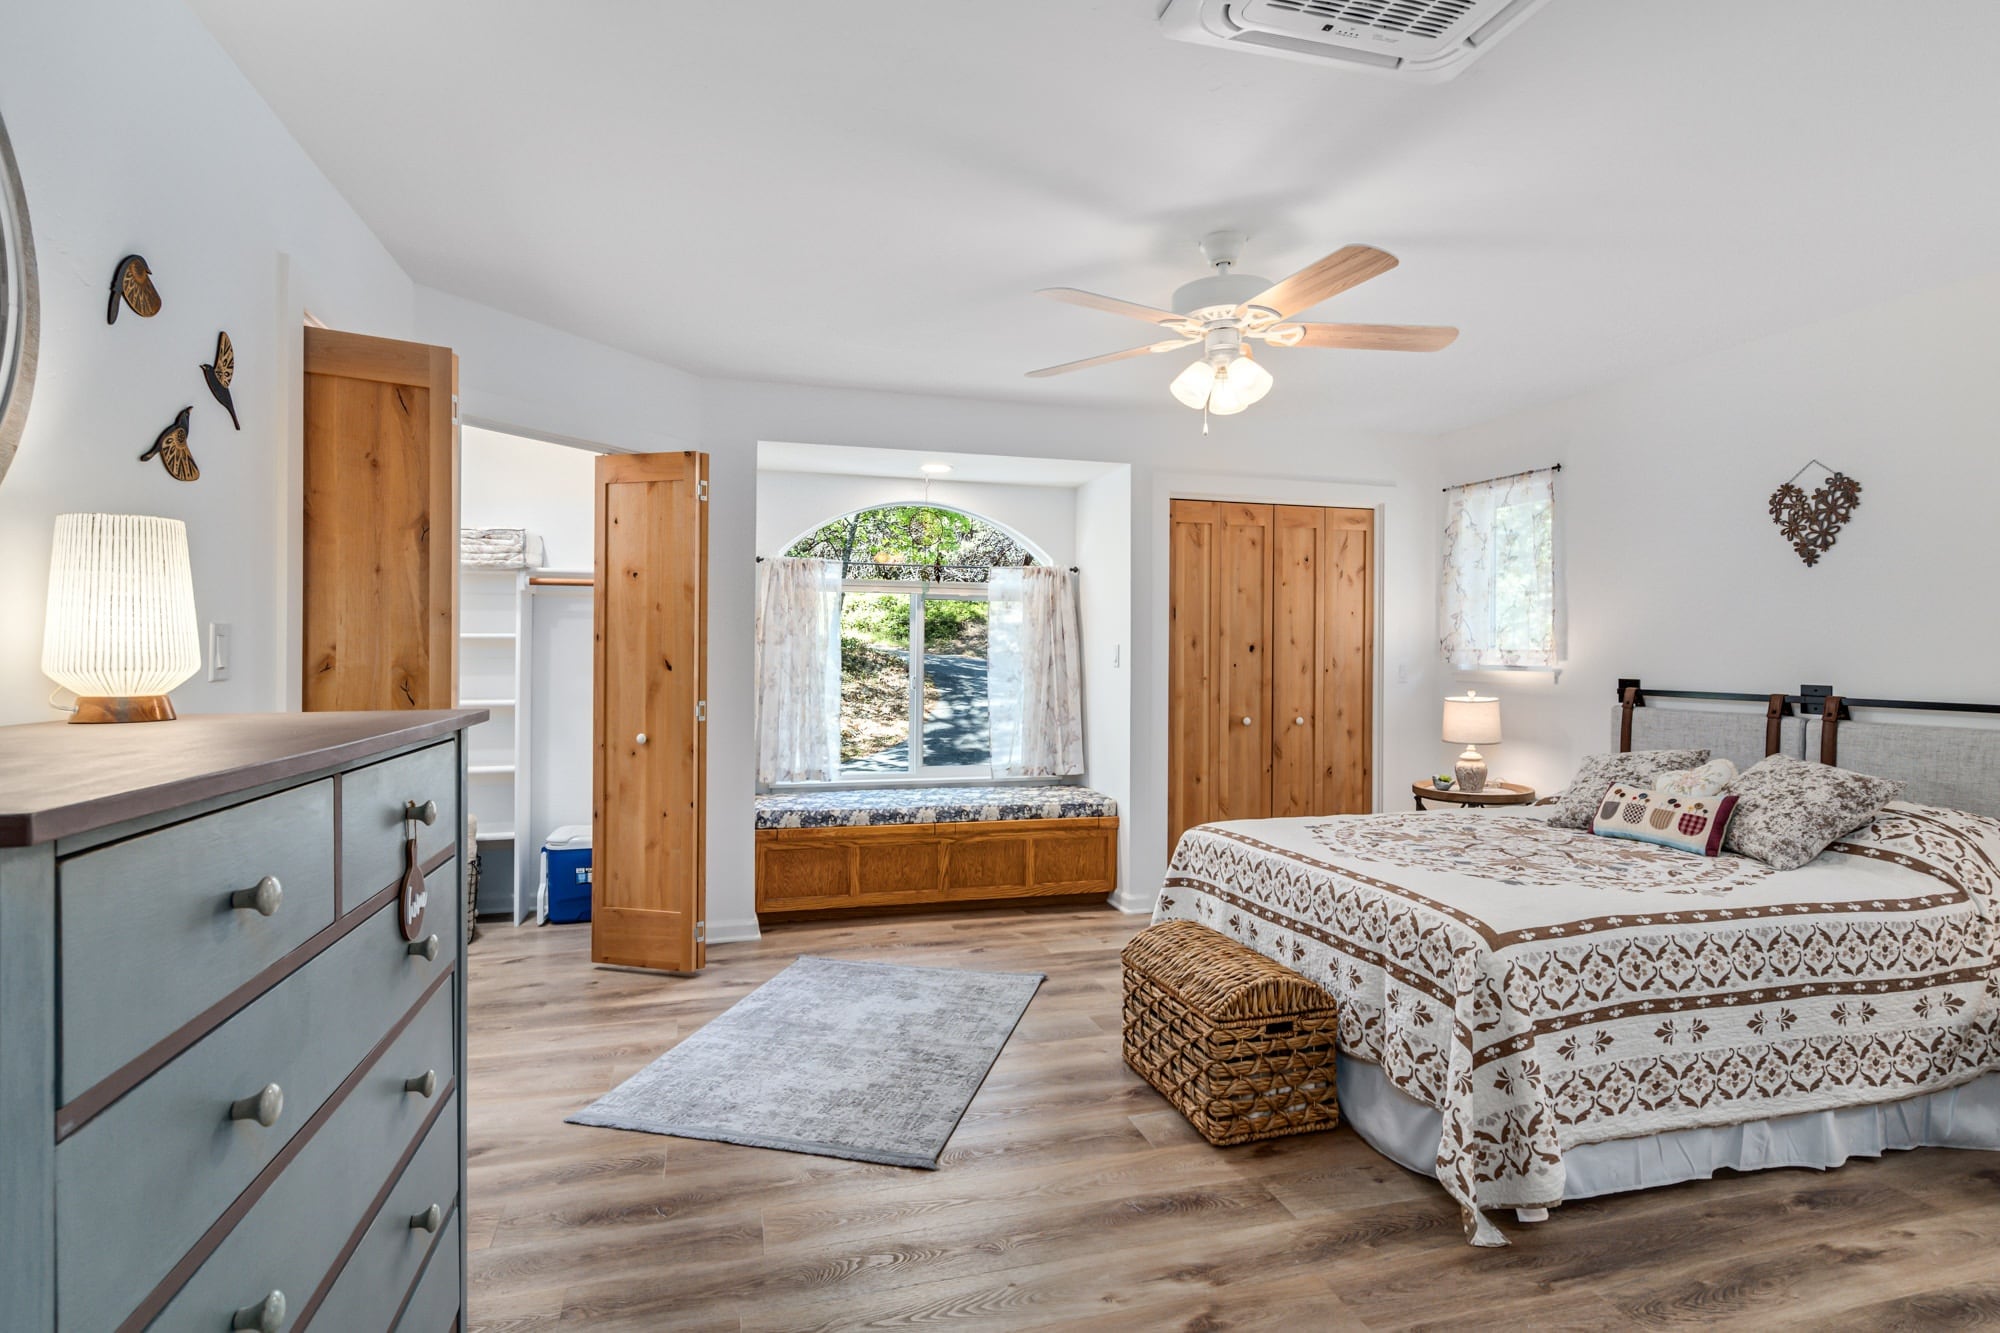 Guest Bedroom two suite.
Pine Mountain Lake Vacation Rental "Up On V1" - Unit 7 Lot 34.